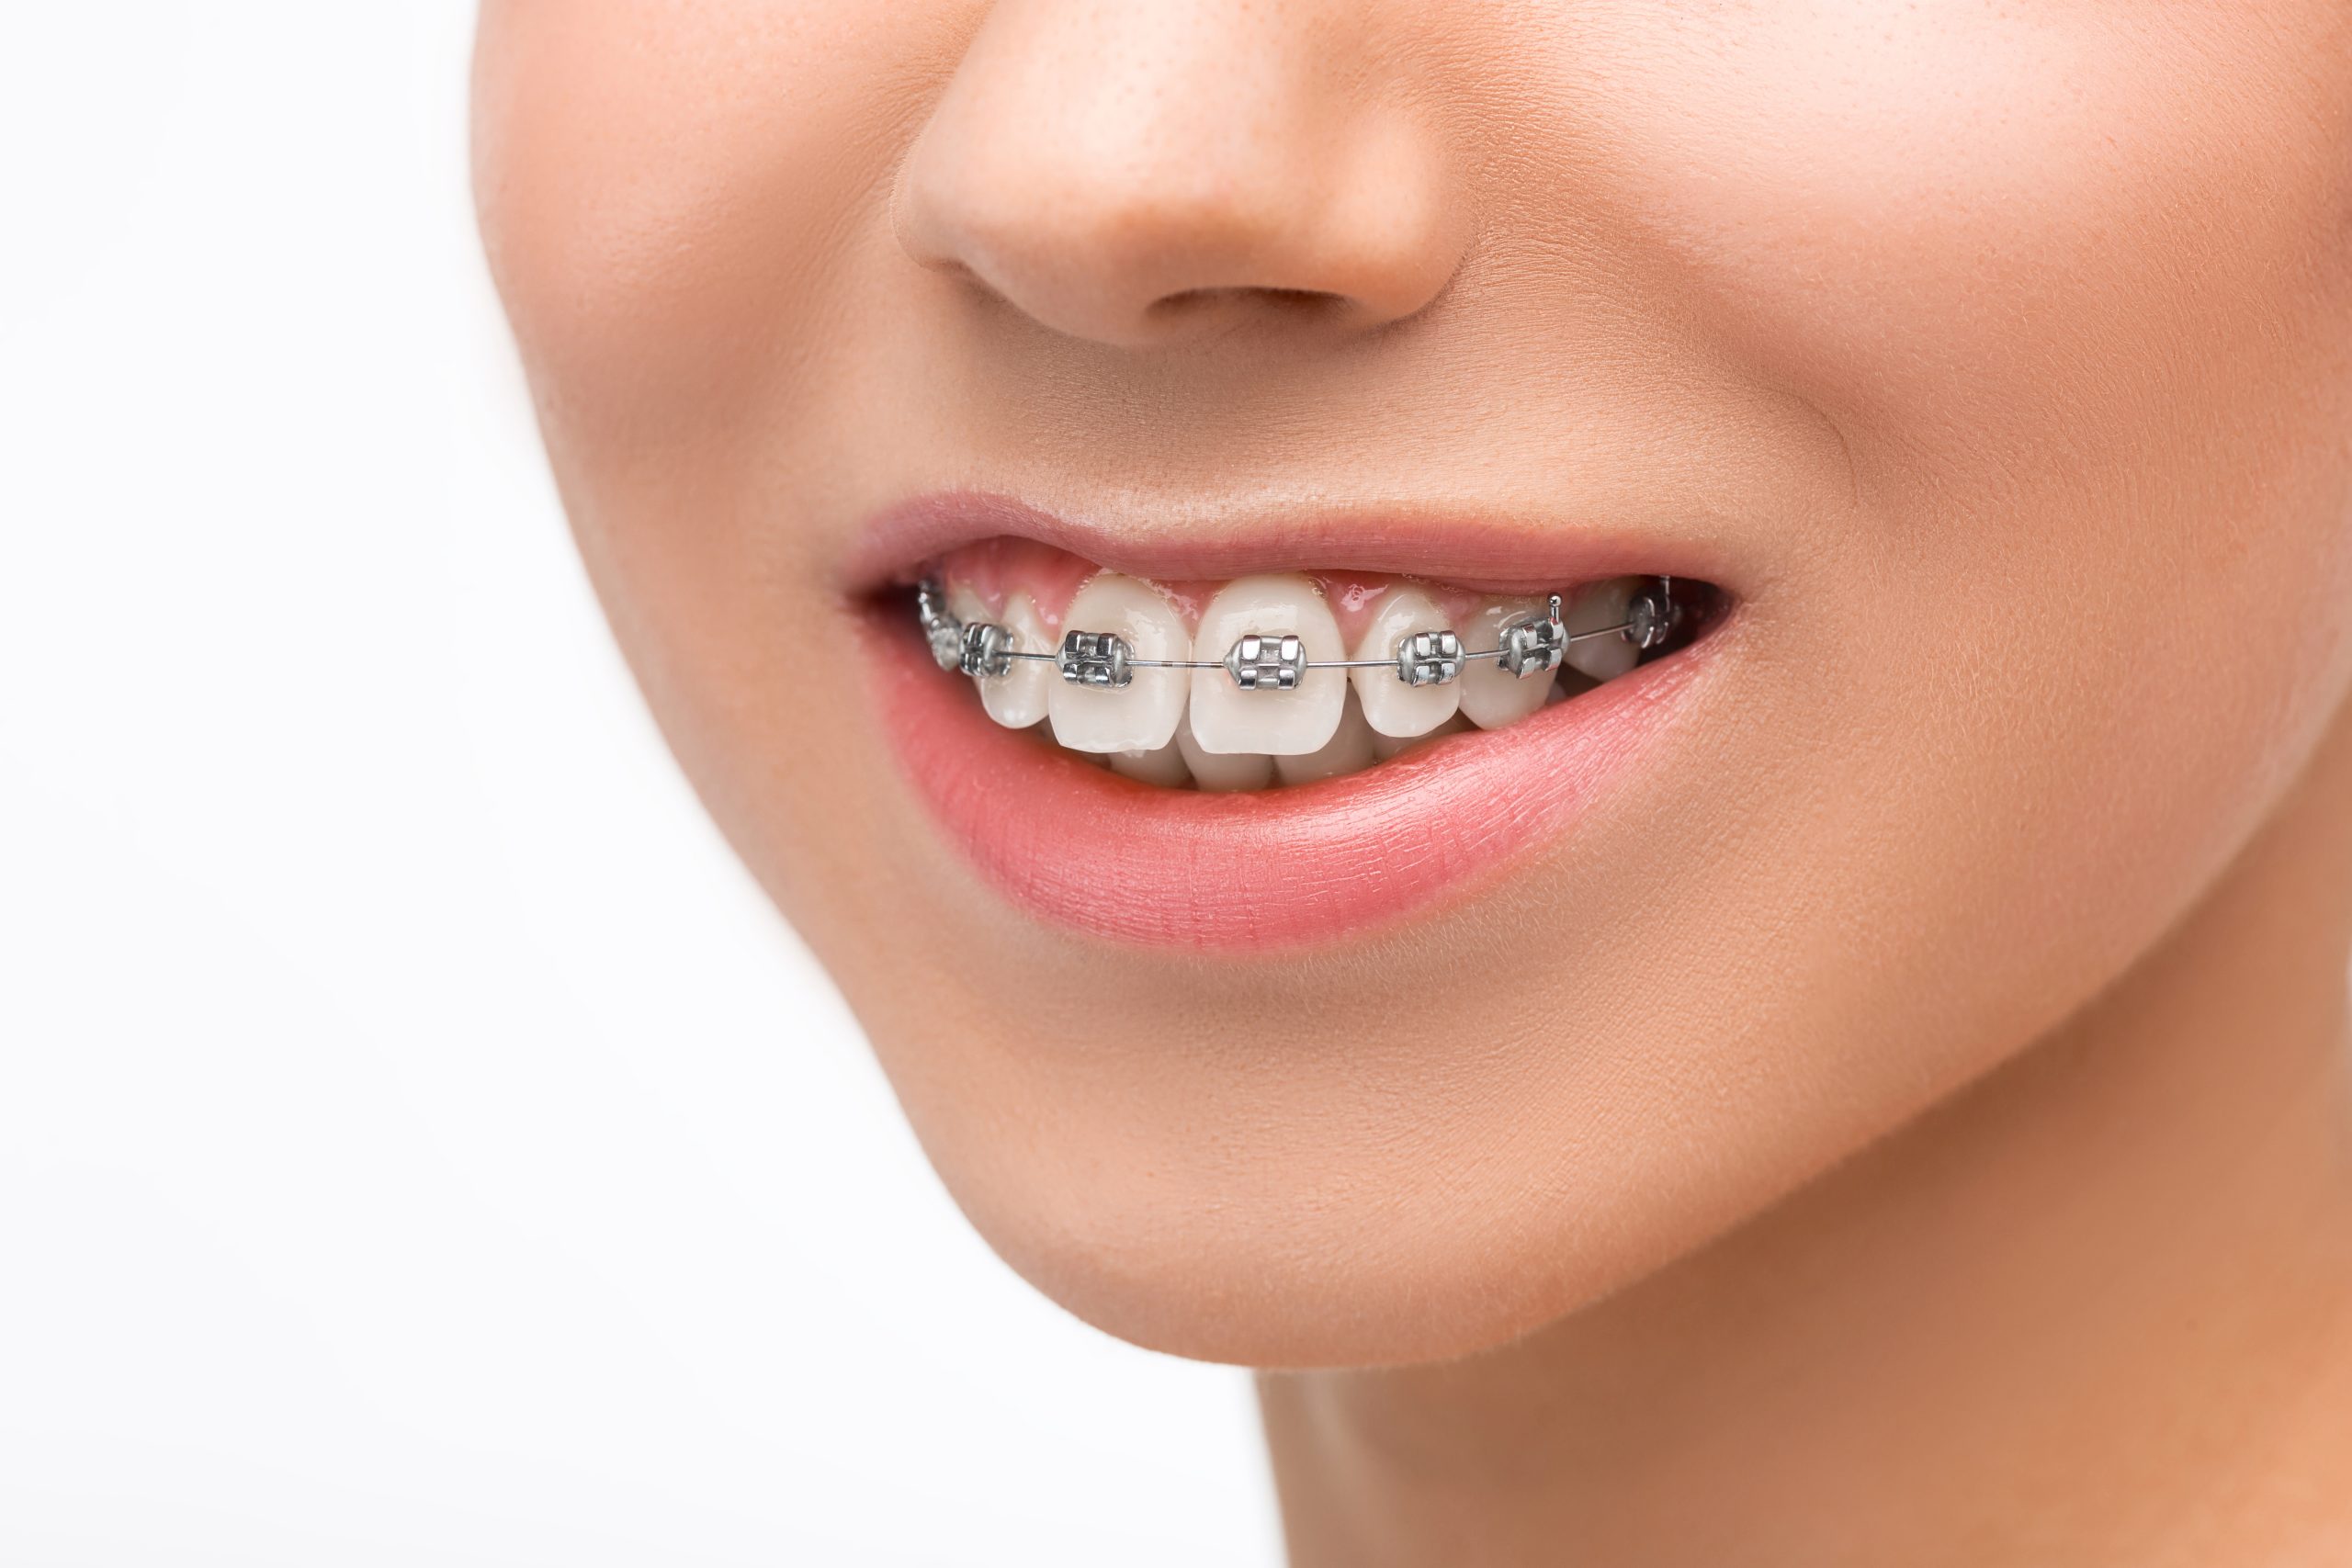 Invisible Aligners for Teeth: